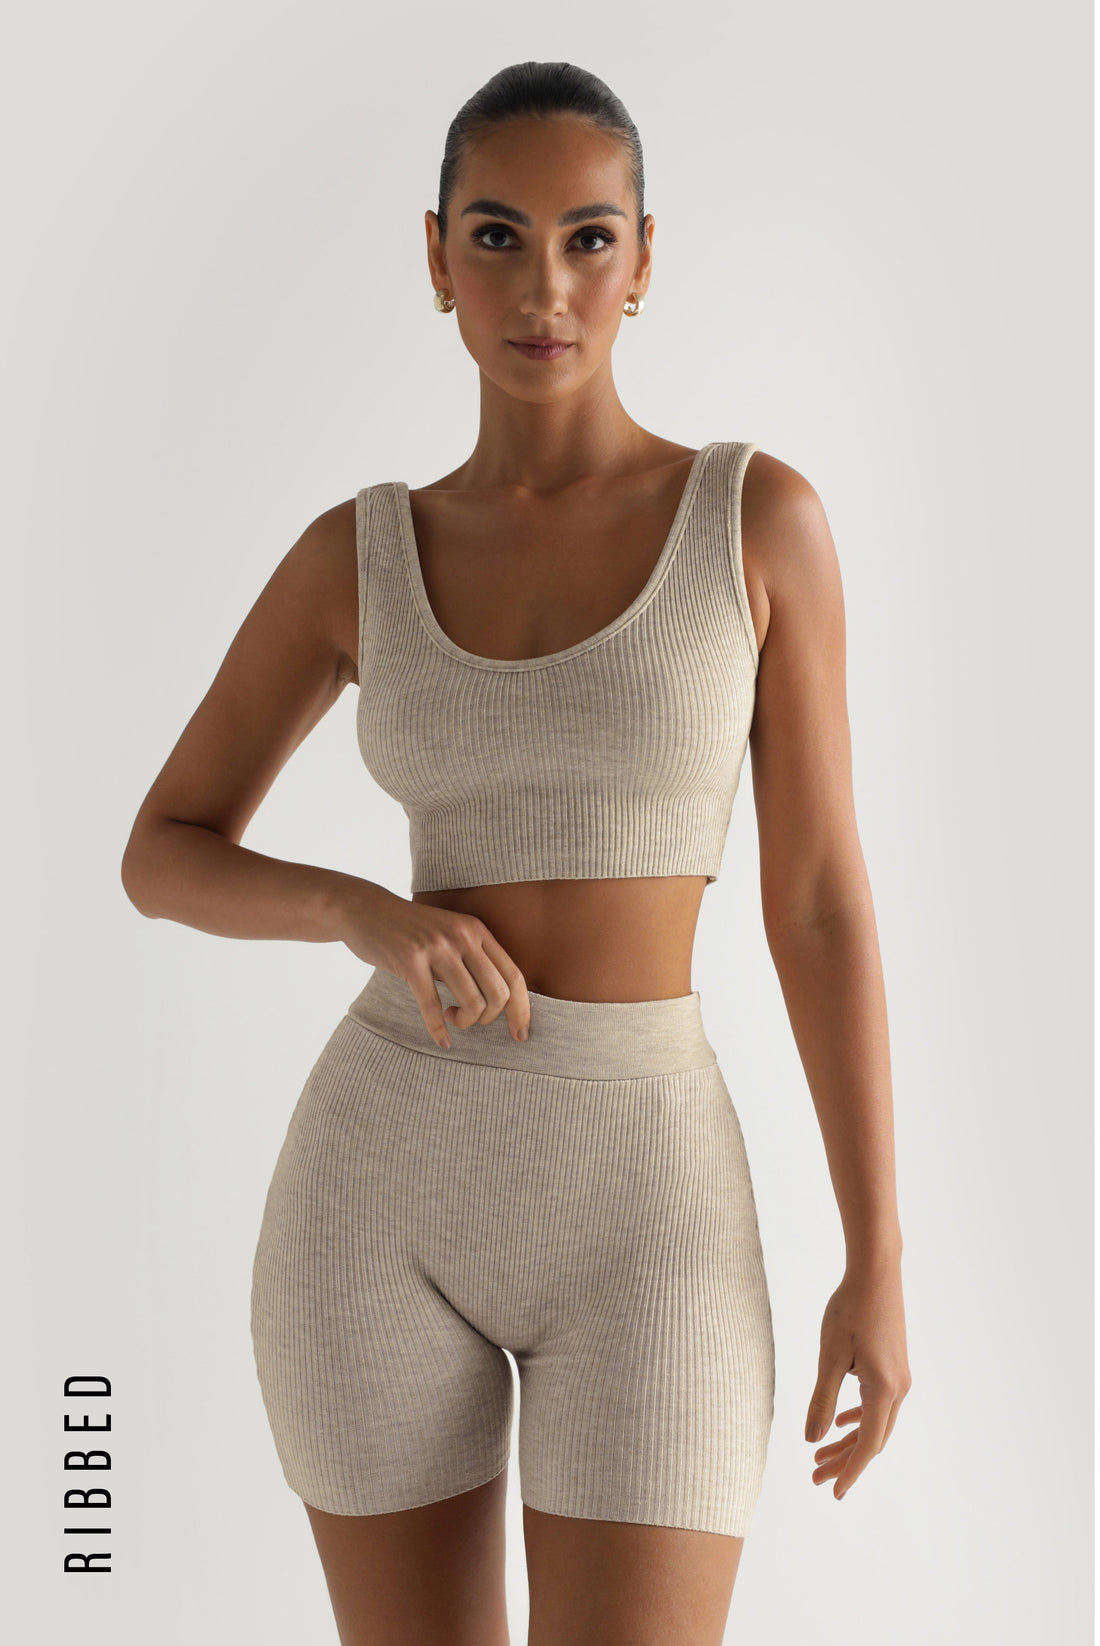 Scooped Ribbed Crop Top - Oatmeal